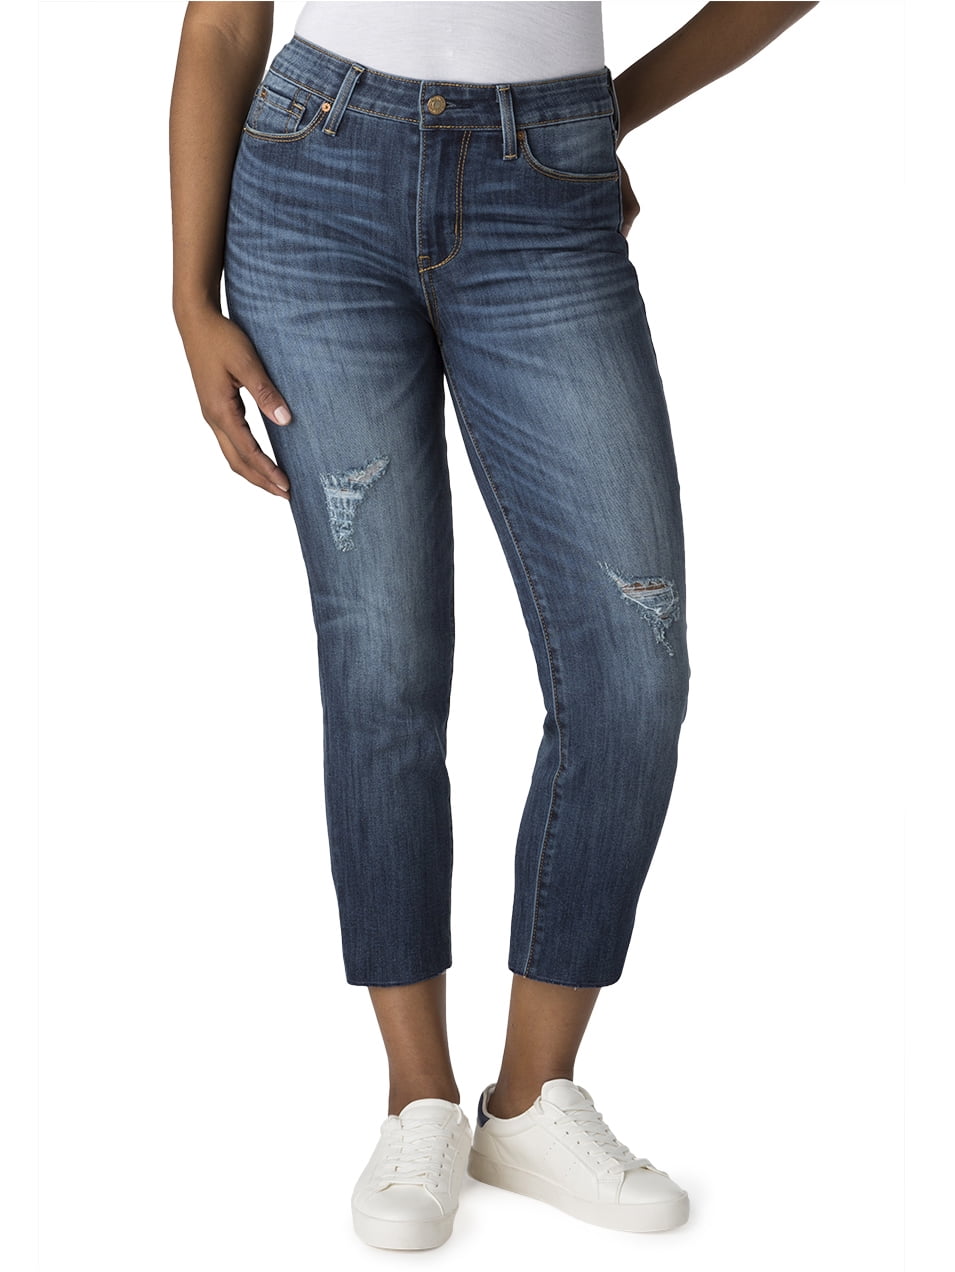 wrangler youth jeans